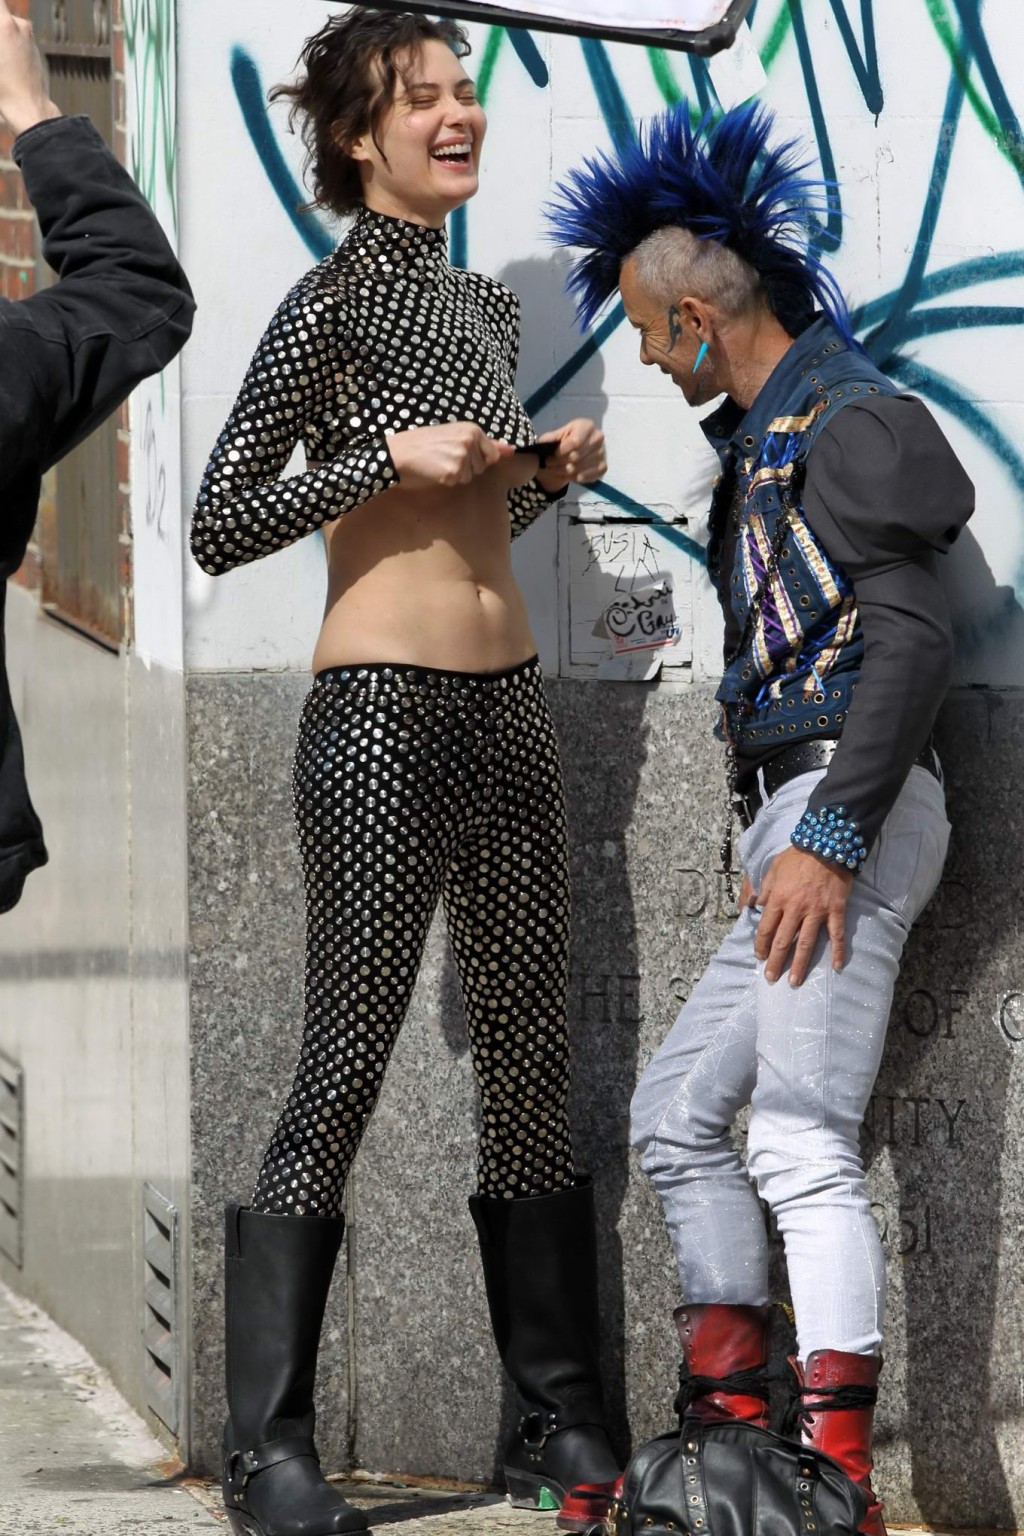 Shalom Harlow showing off her boobs to a punker at the photoshoot in Manhattan #75268331